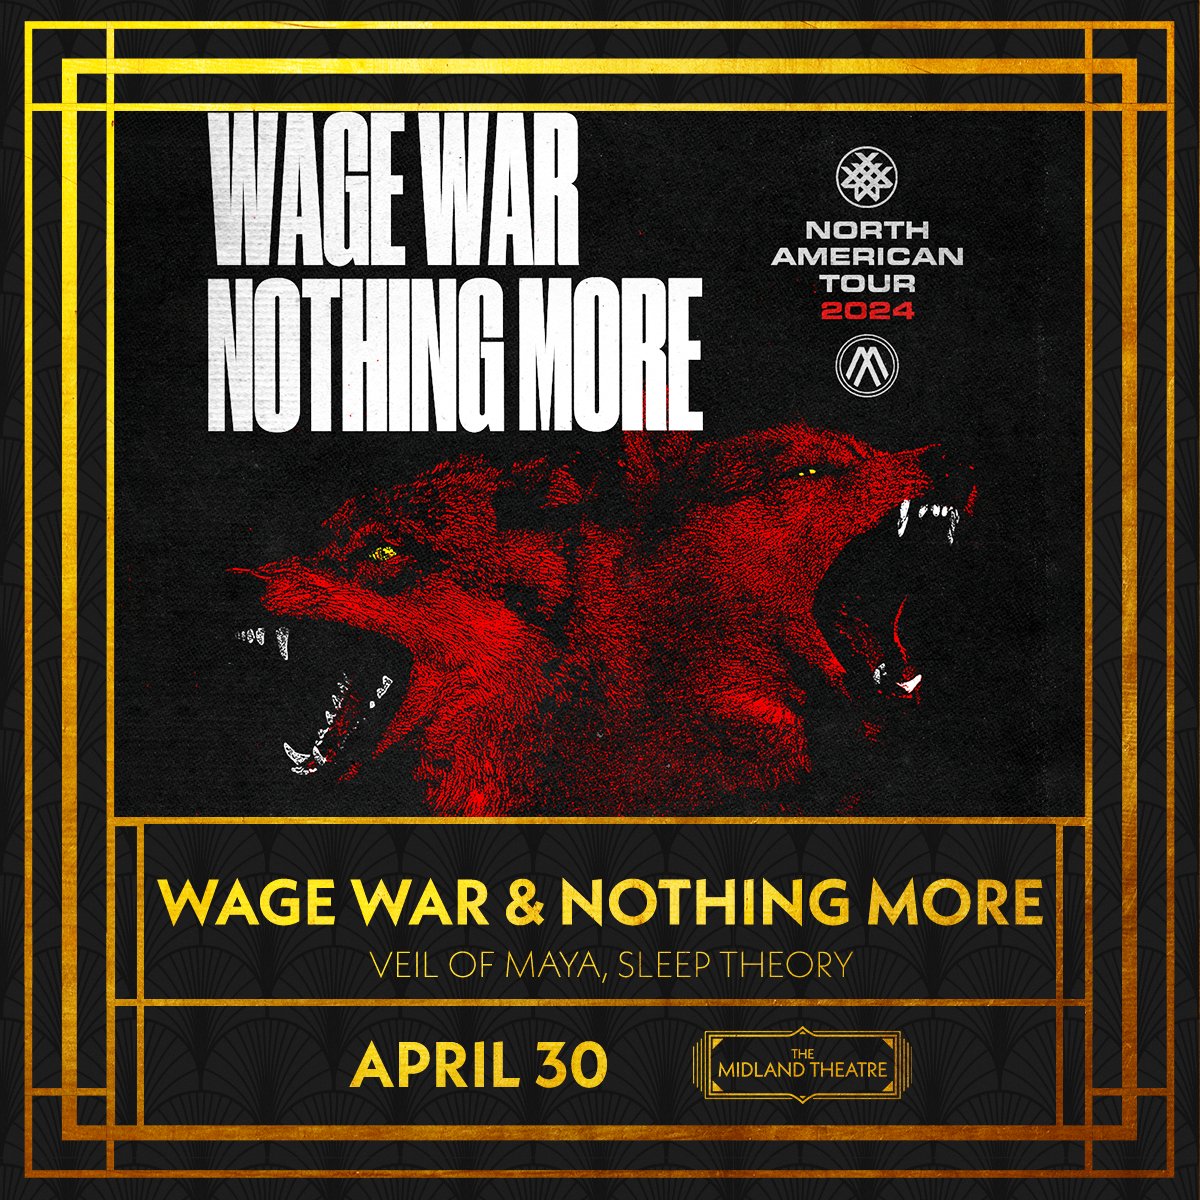 JUST ANNOUNCED @wagewar & @nothingmorerock come to The Midland on April 30. Tickets go on sale this Friday at 10 a.m.